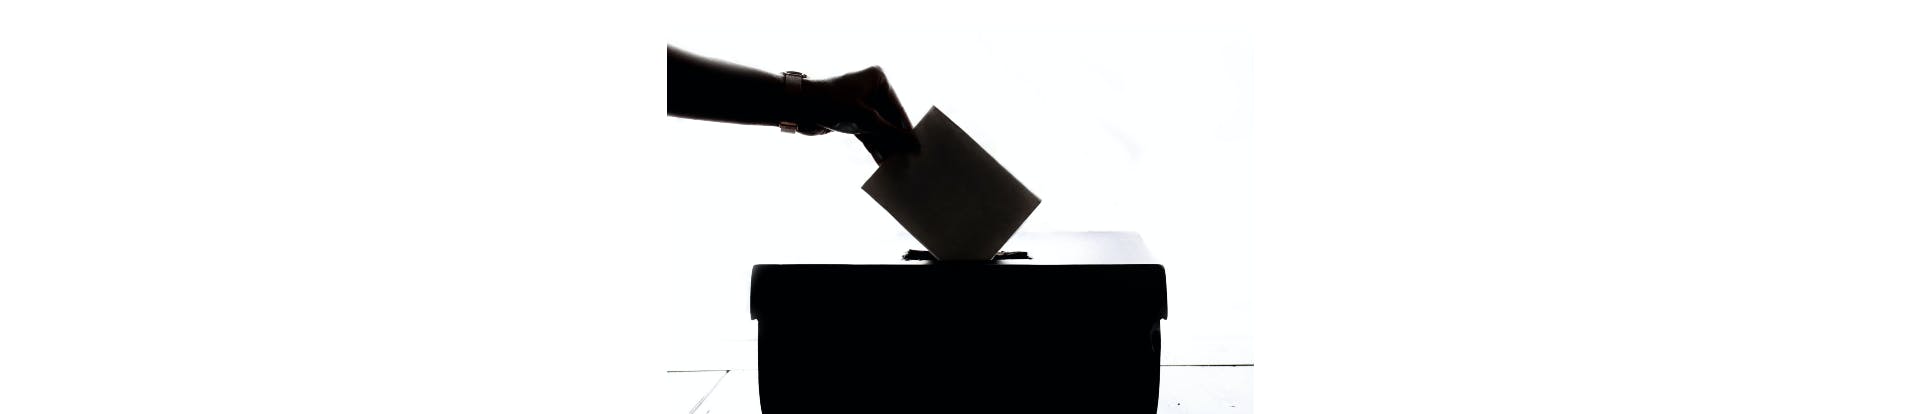 Silhouette of a hand placing a voting slip into a ballot box